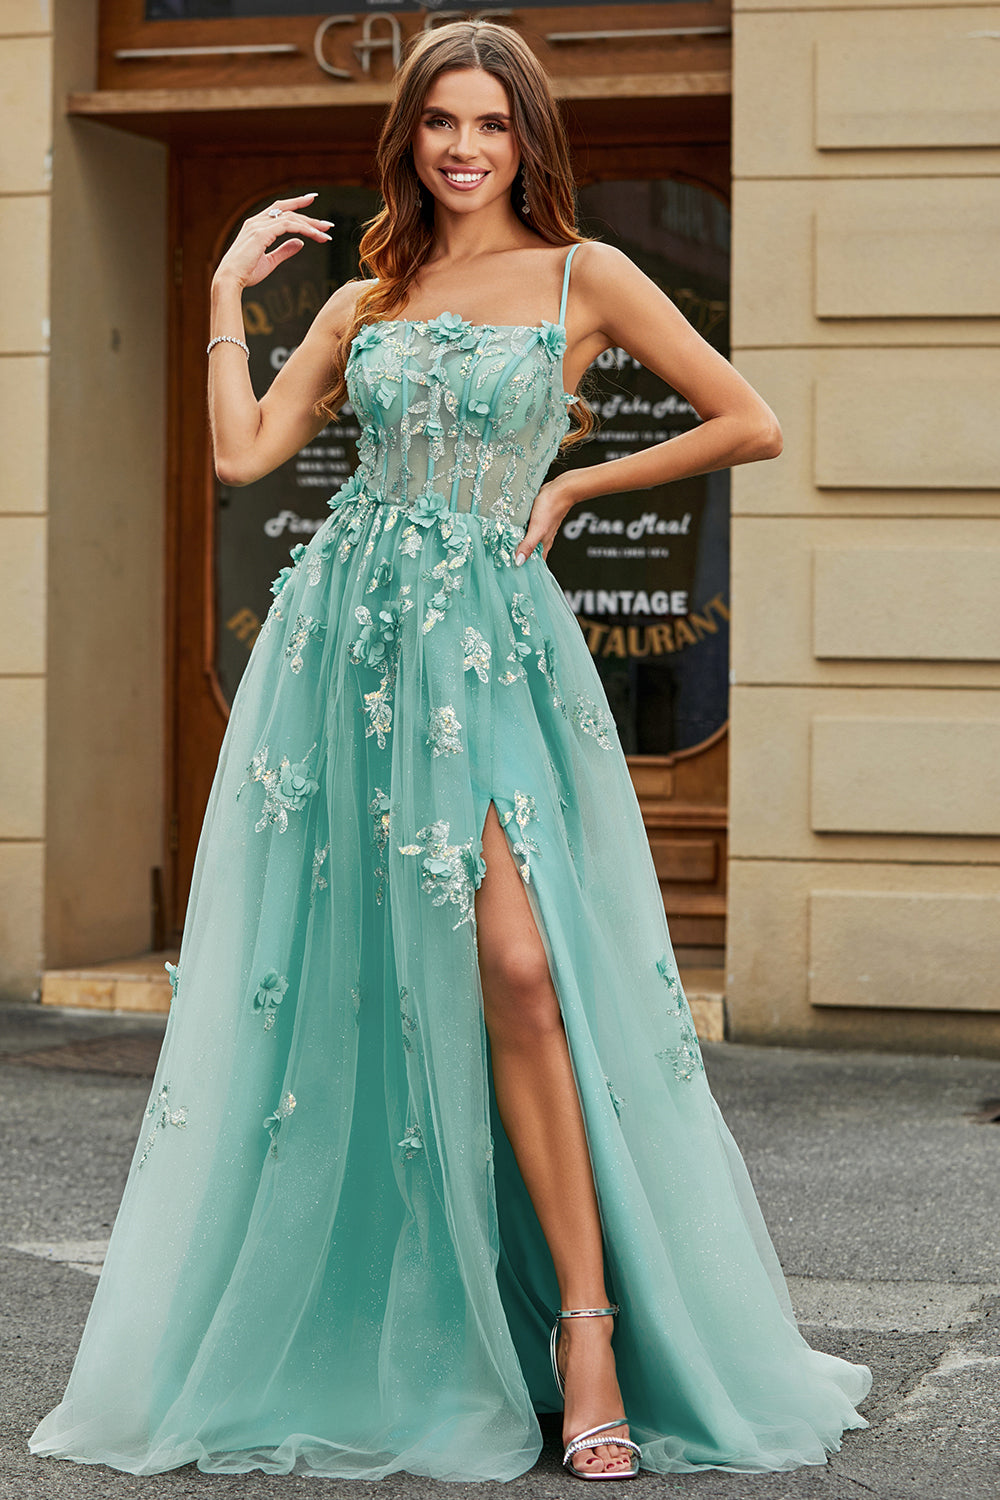 Green A-Line Spaghetti Straps Long Sparkly Applique Prom Dress With Slit